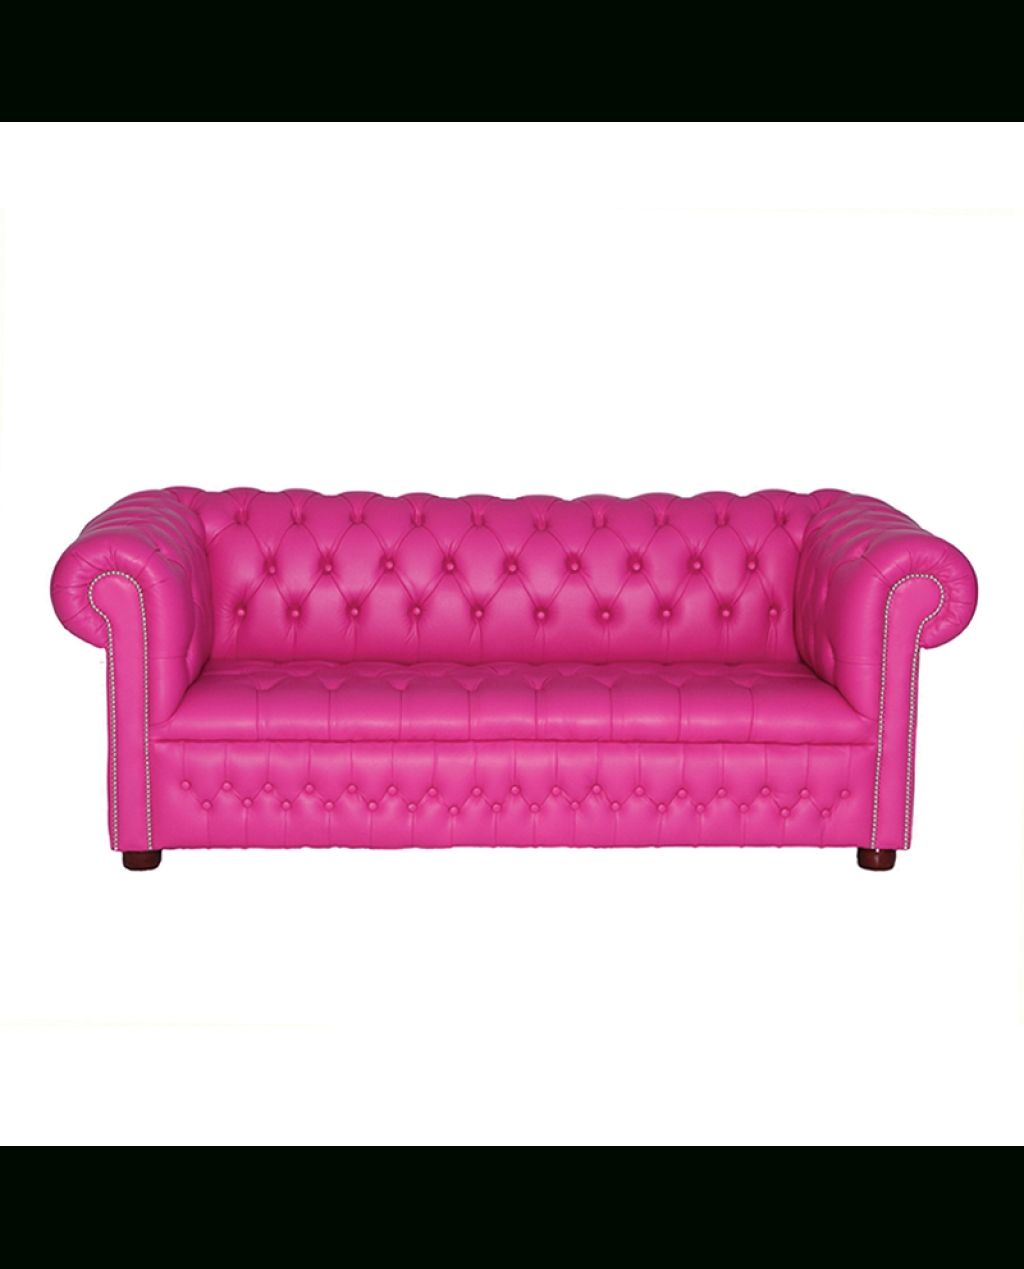 Manchester Sofas For Most Popular Chesterfield Sofa Hire Manchester (View 13 of 20)